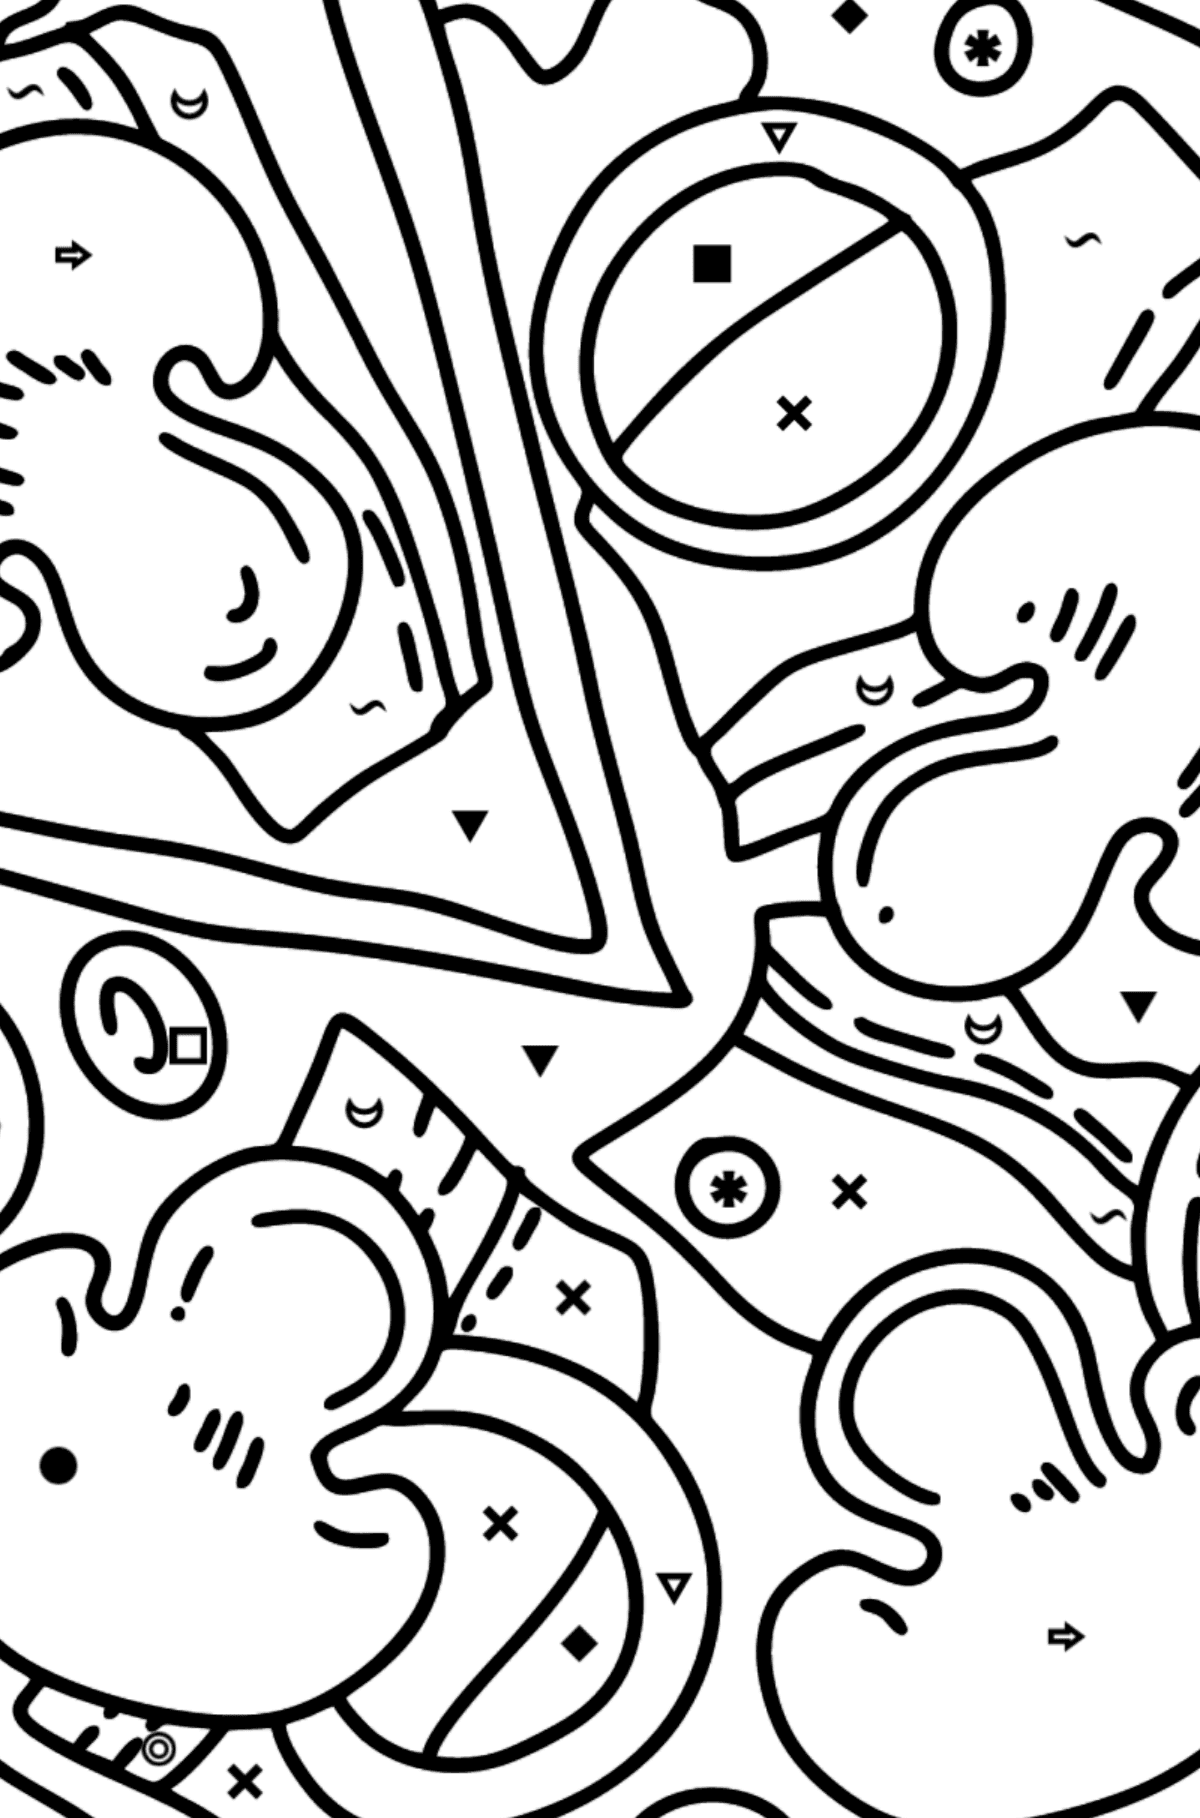 Pizza with Mushrooms coloring page - Coloring by Symbols and Geometric Shapes for Kids